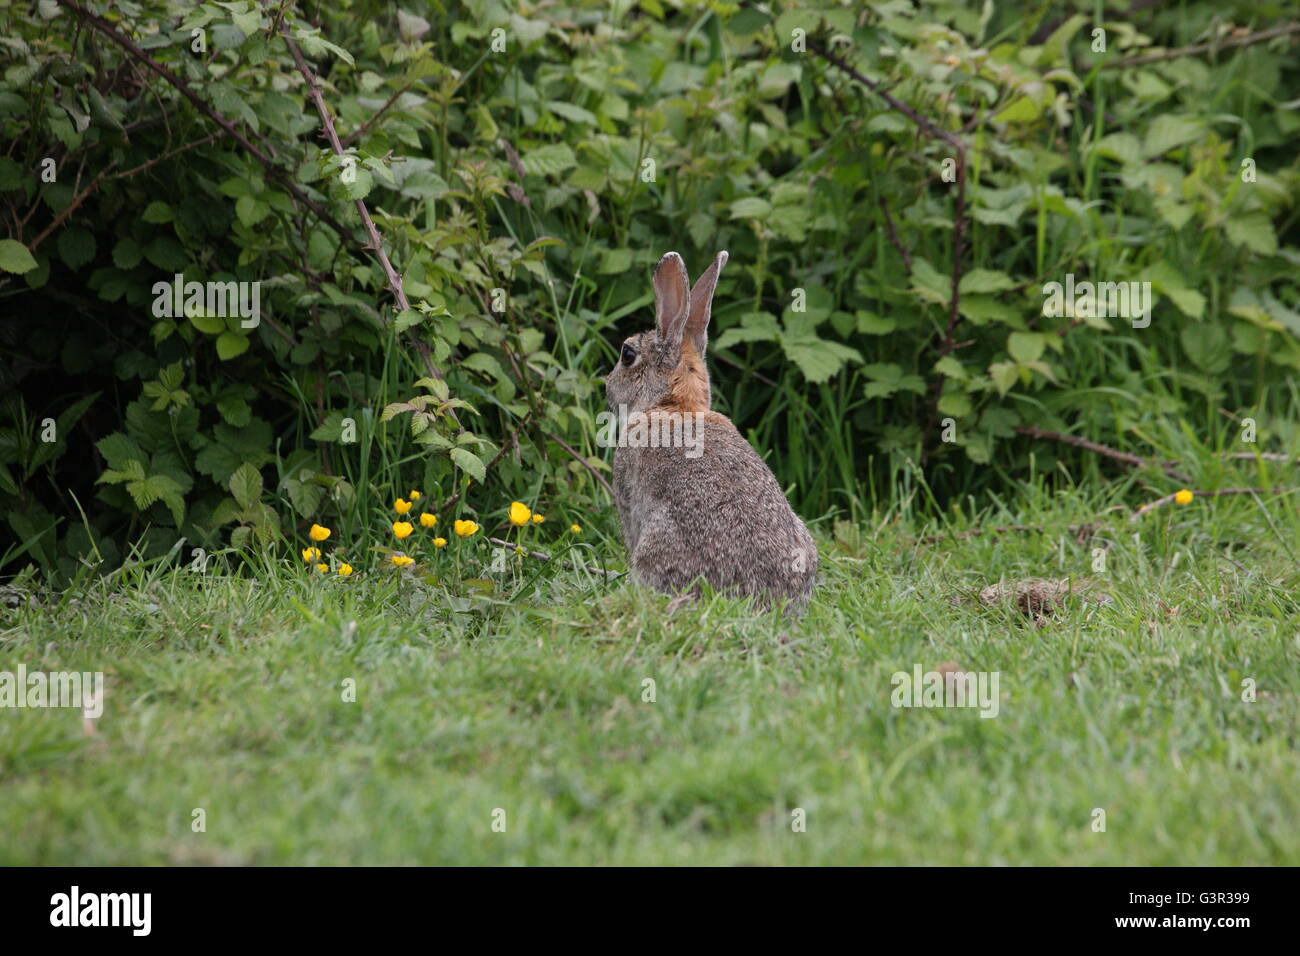 brown wild rabbit sitting up looking at a hedge in a field,rural,pest, Stock Photo